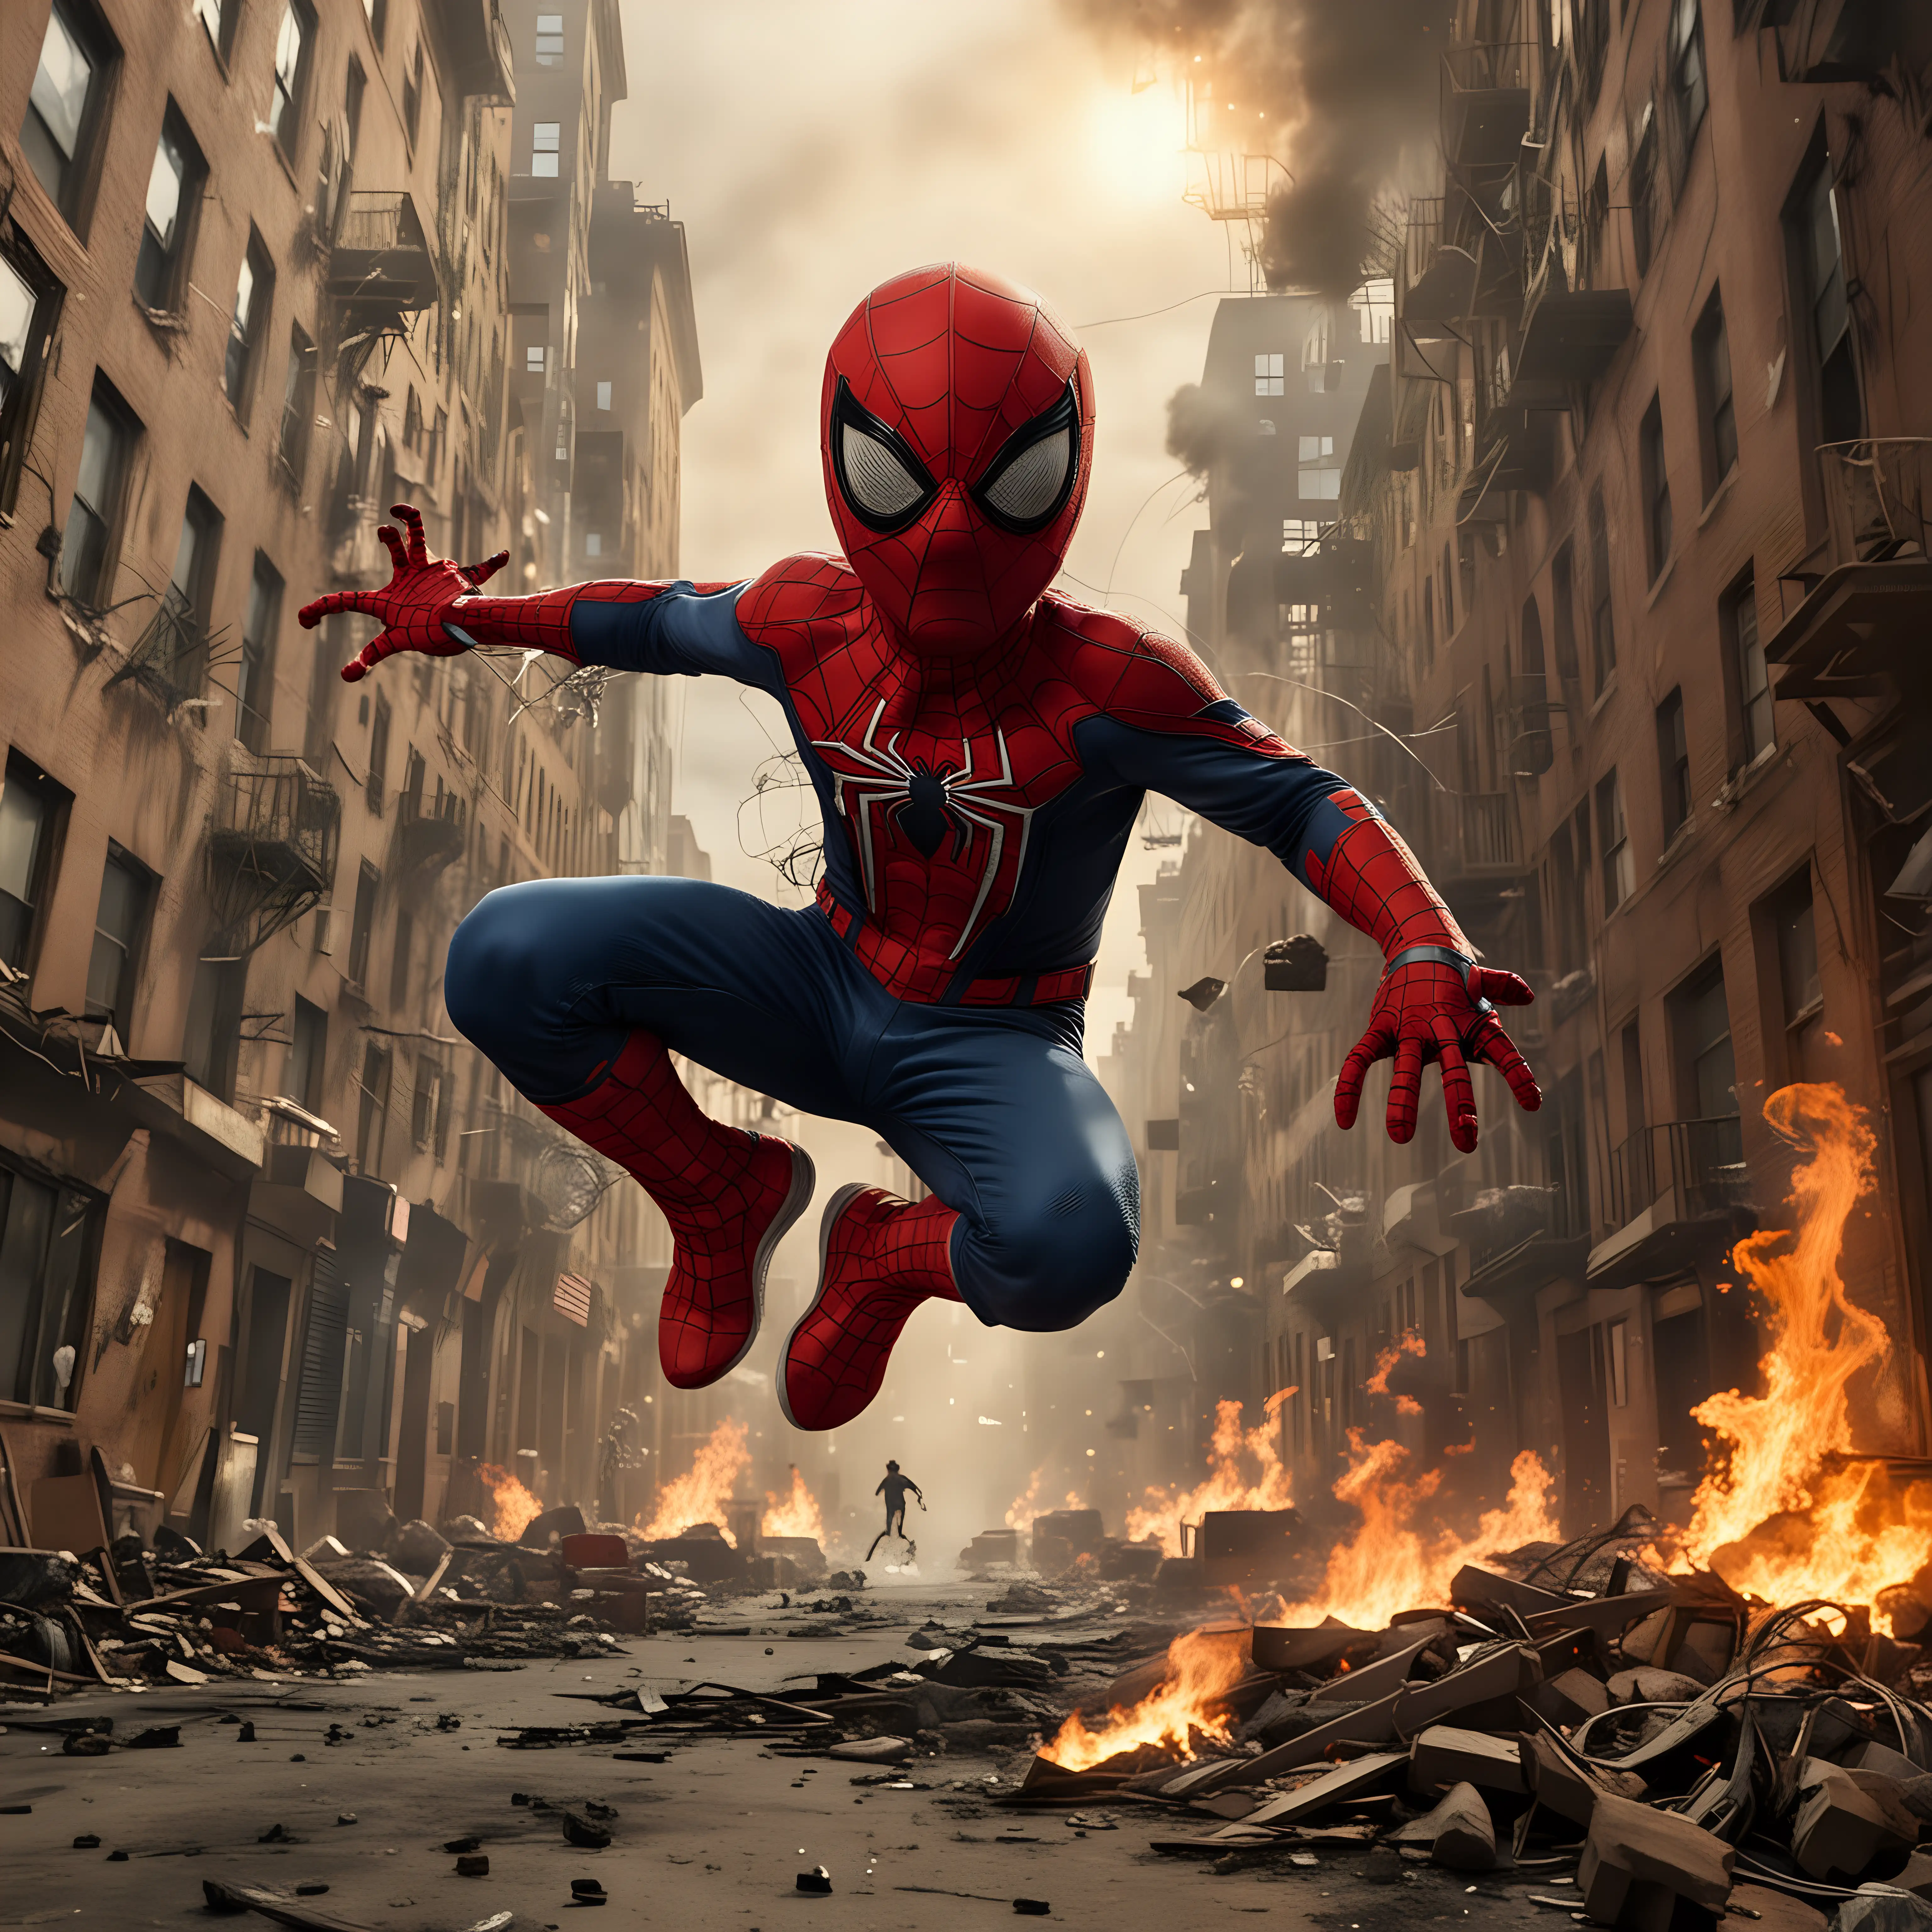 A 6-year-old boy in a Spiderman suit jumps with his cobwebs in the middle of a burning city.
